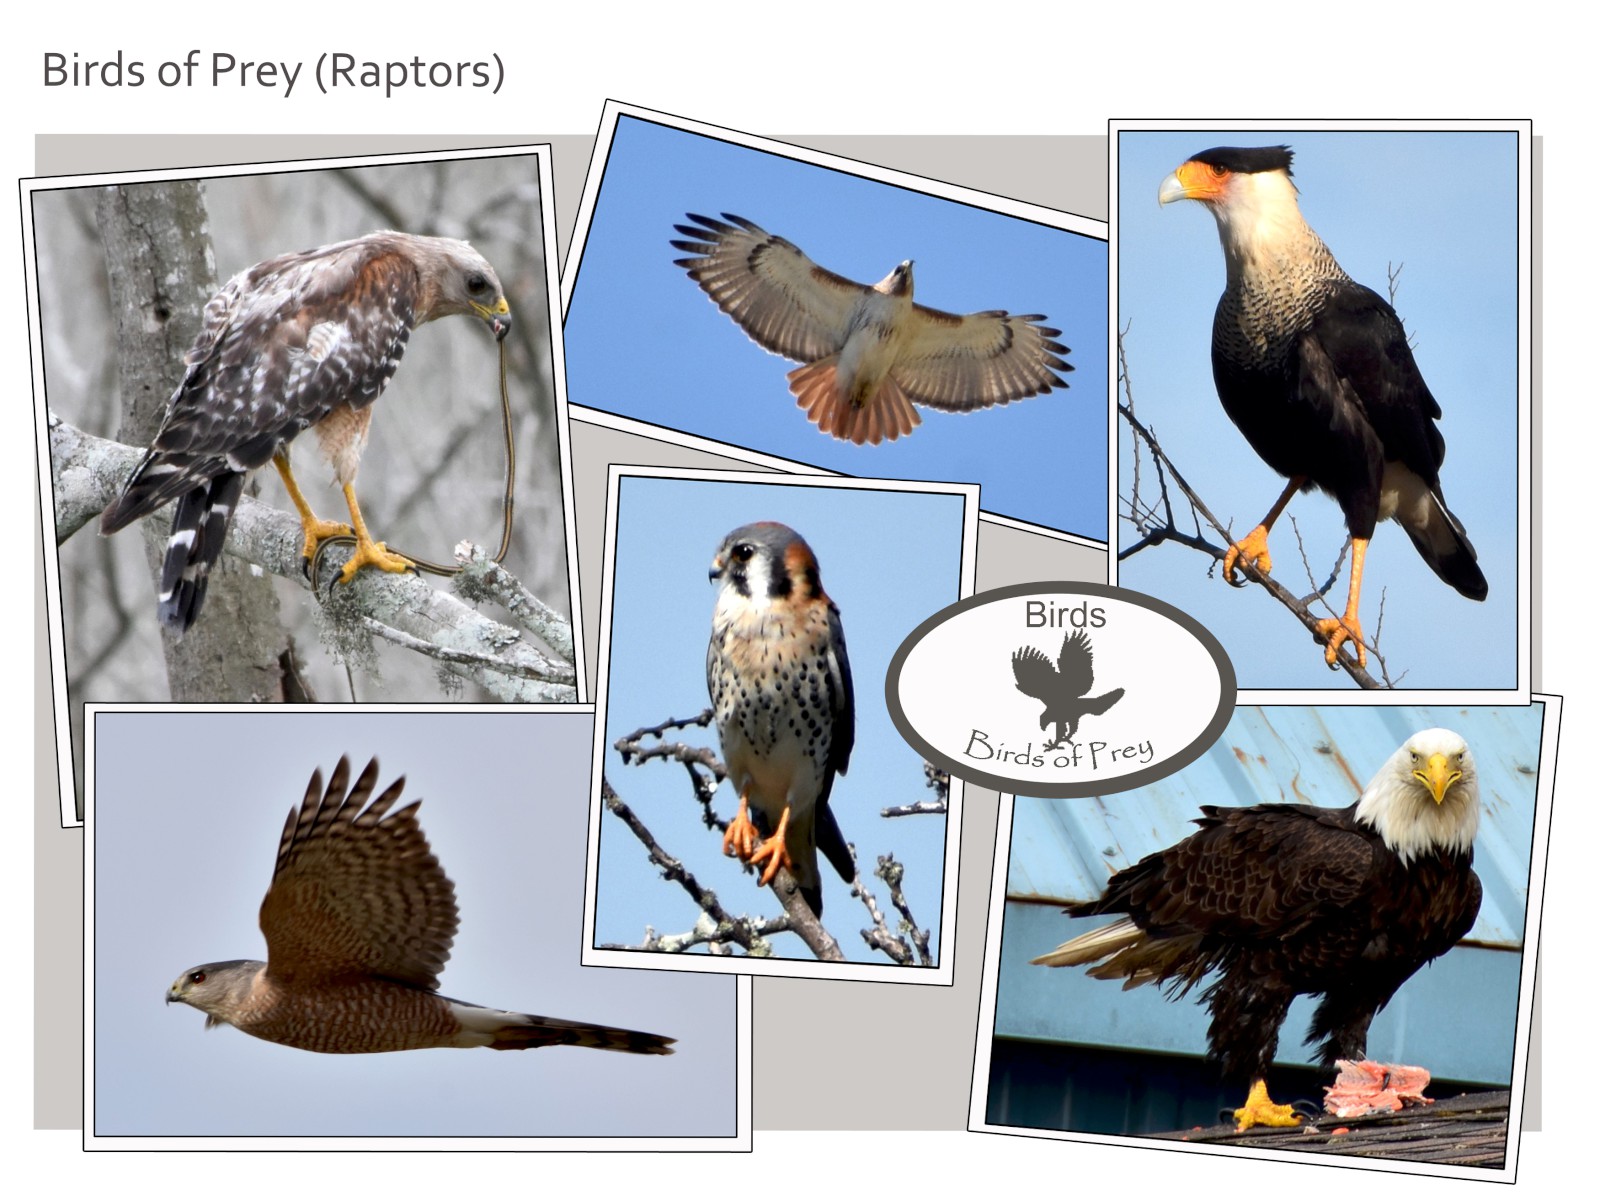 Birds of prey - Our Planet Images